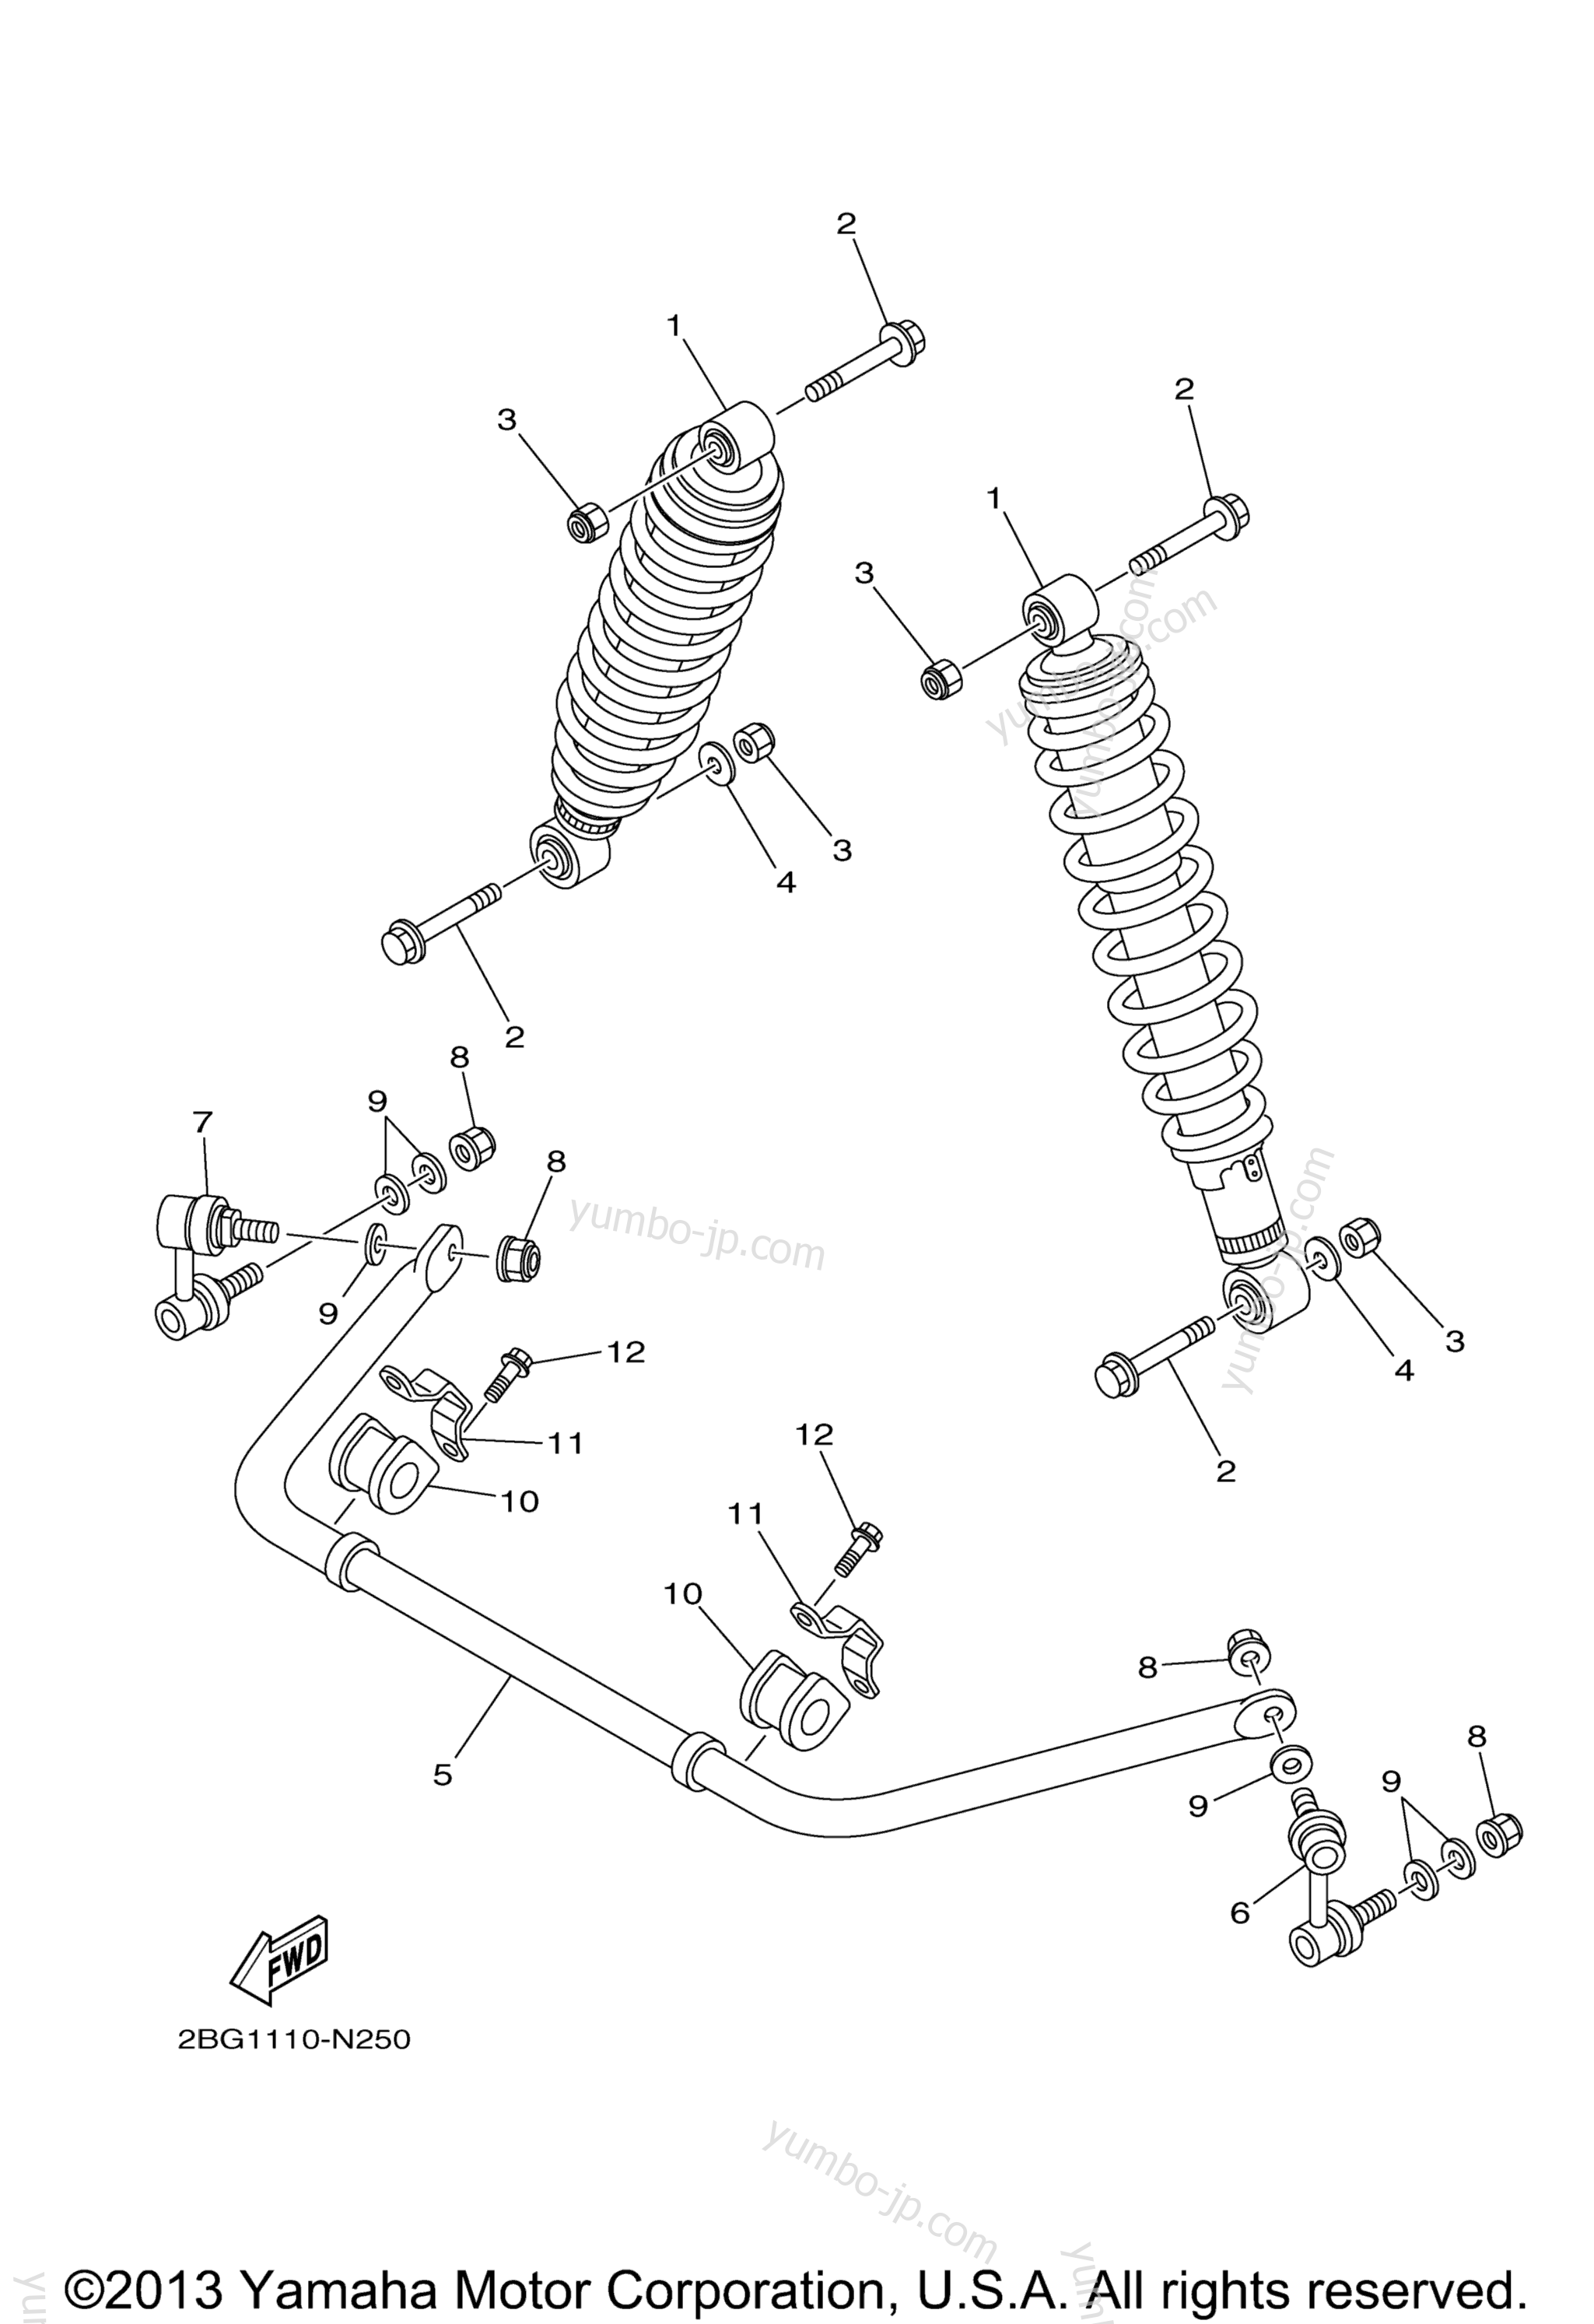 Rear Suspension for ATVs YAMAHA GRIZZLY 700 FI 4WD (YFM700DEL) 2014 year